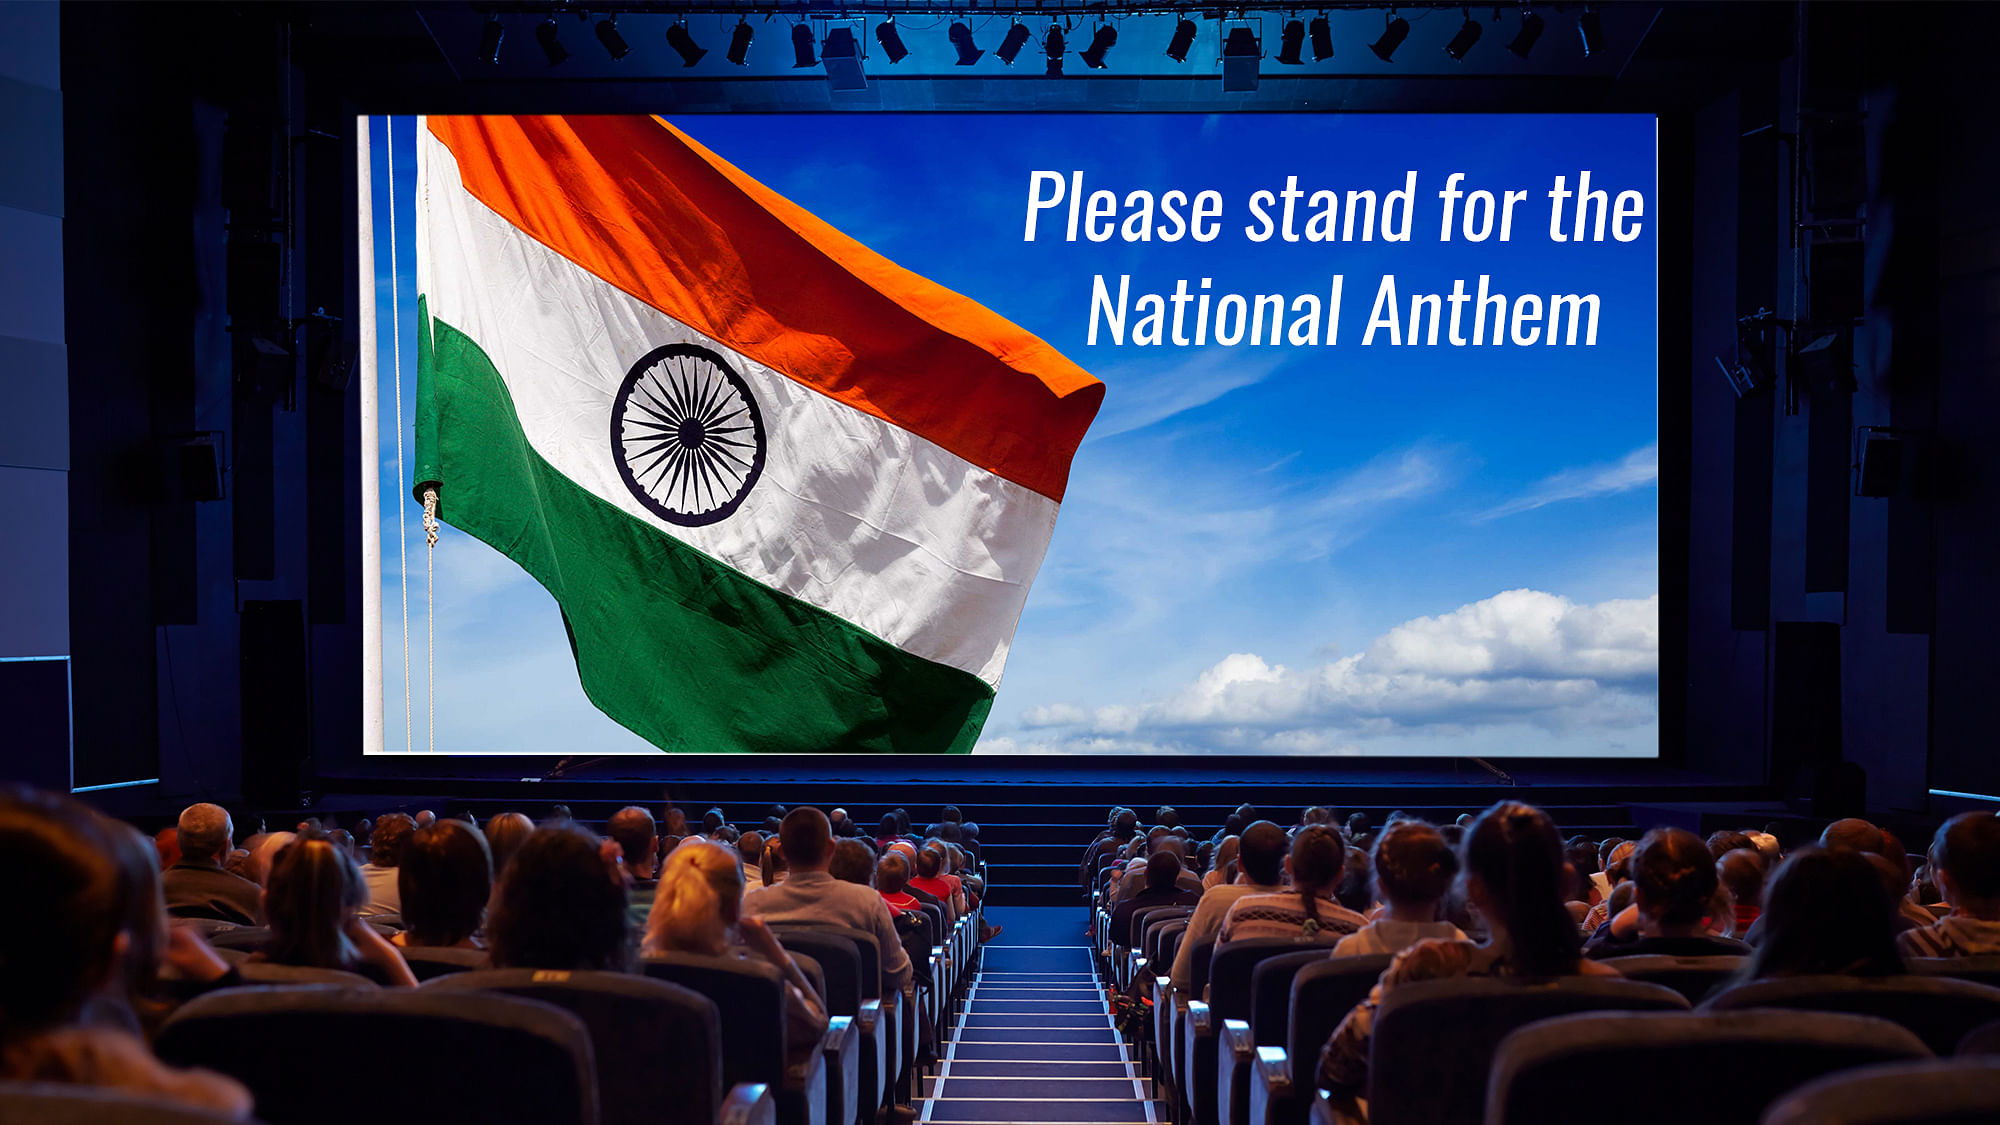 An FIR has been registered against the two students for allegedly disrespecting the national anthem.